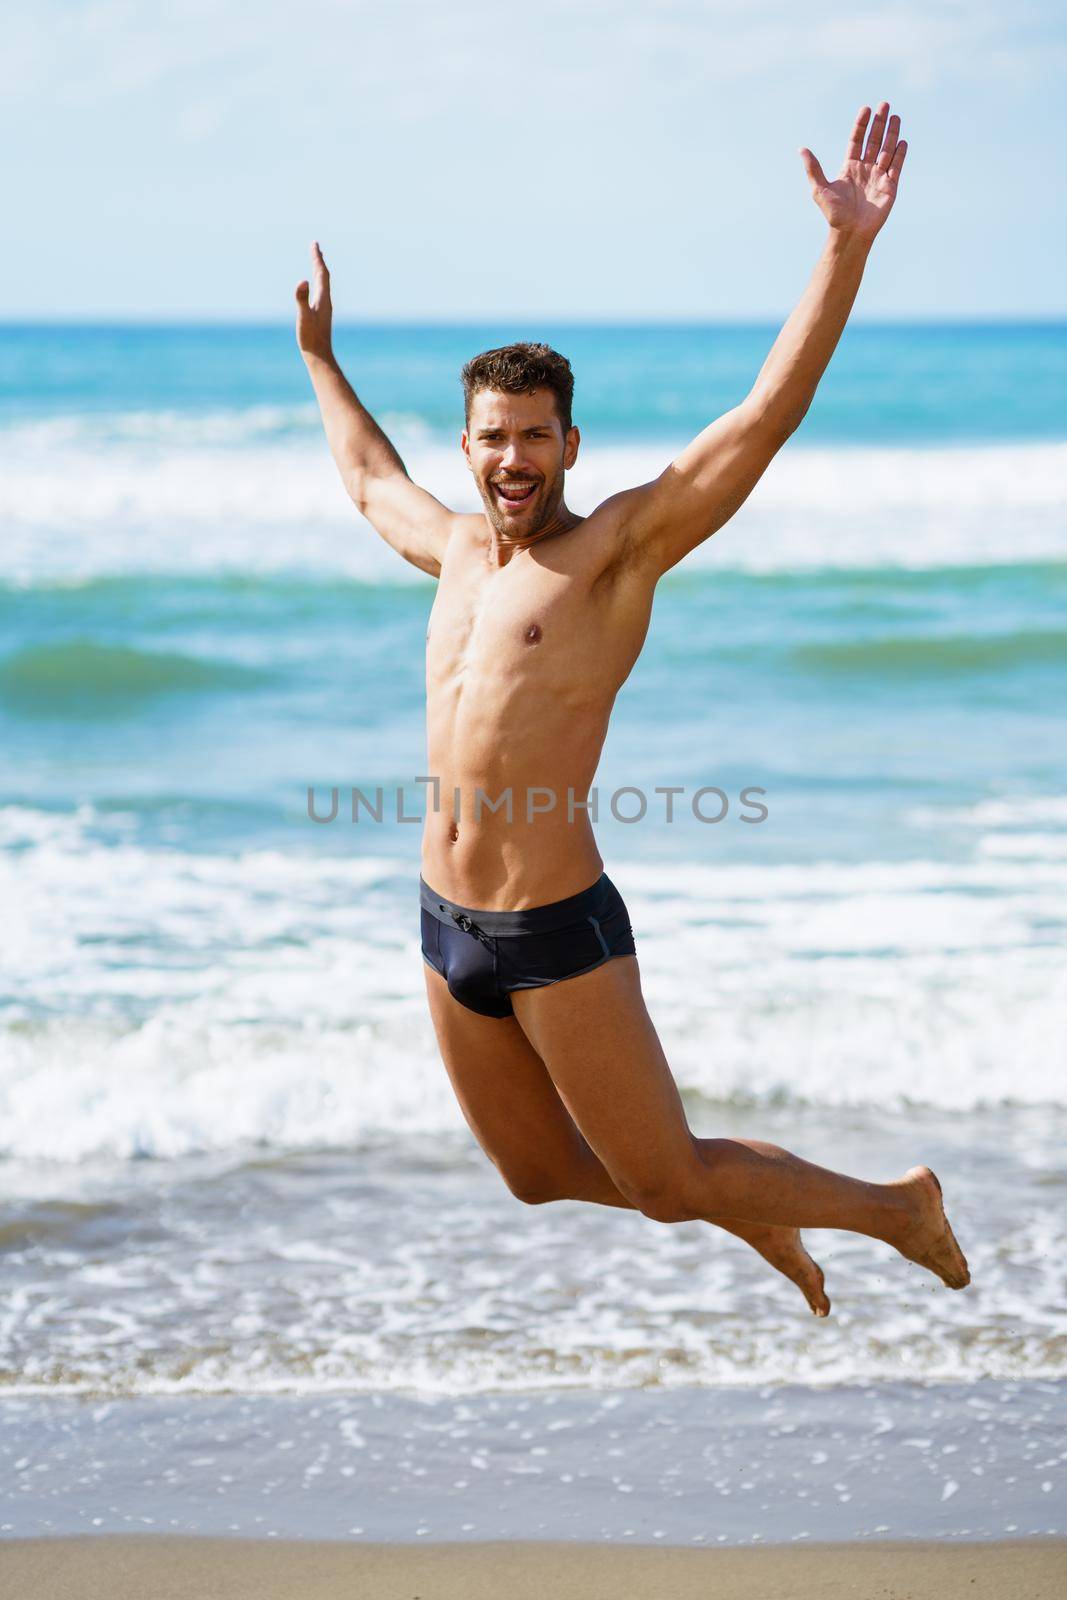 Funny young man with beautiful body in swimwear jumping on a tropical beach.